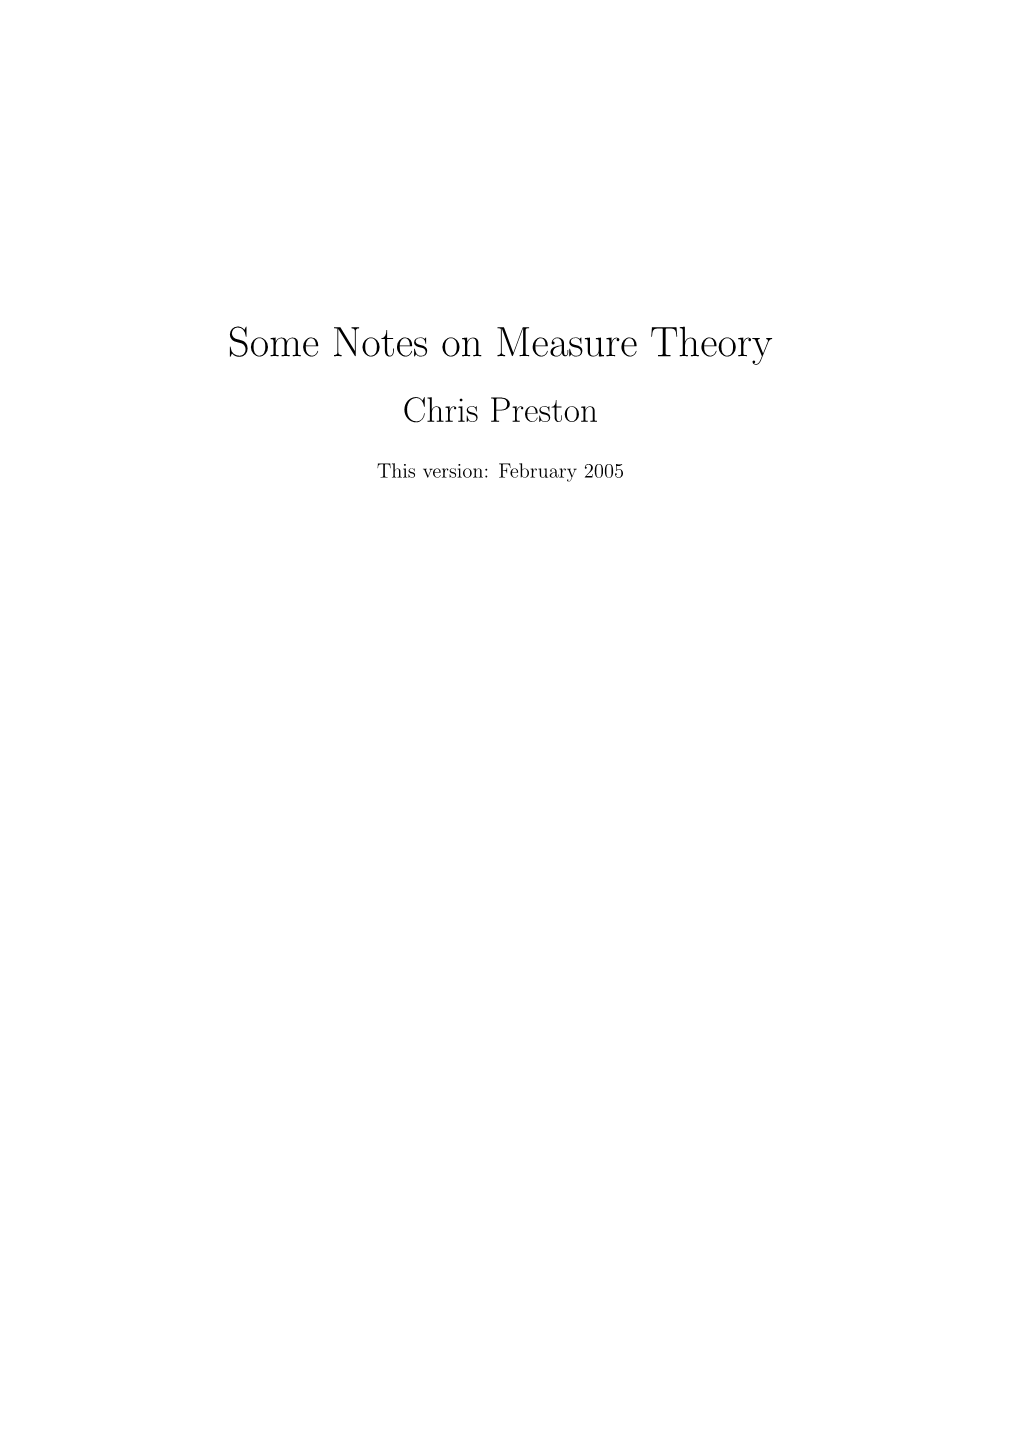 Some Notes on Measure Theory (2005)